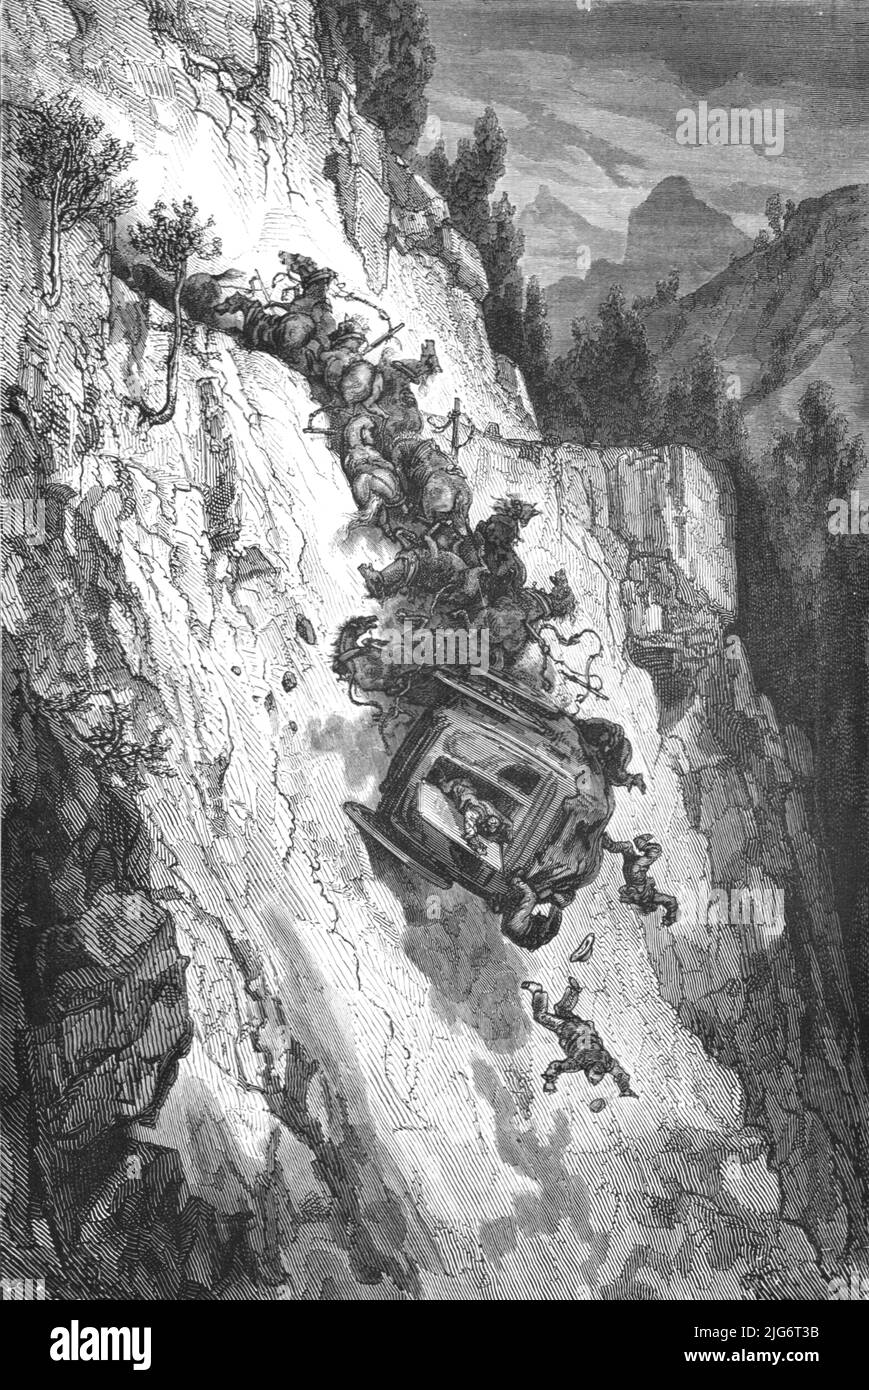 'An Accident; An Autumn Tour in Andalusia', 1875. [Stagecoach falling from a mountain road in Spain]. From, 'Illustrated Travels' by H.W. Bates. [Cassell, Petter, and Galpin, c1880, London] Belle Sauvage Works.London E.C. Stock Photo